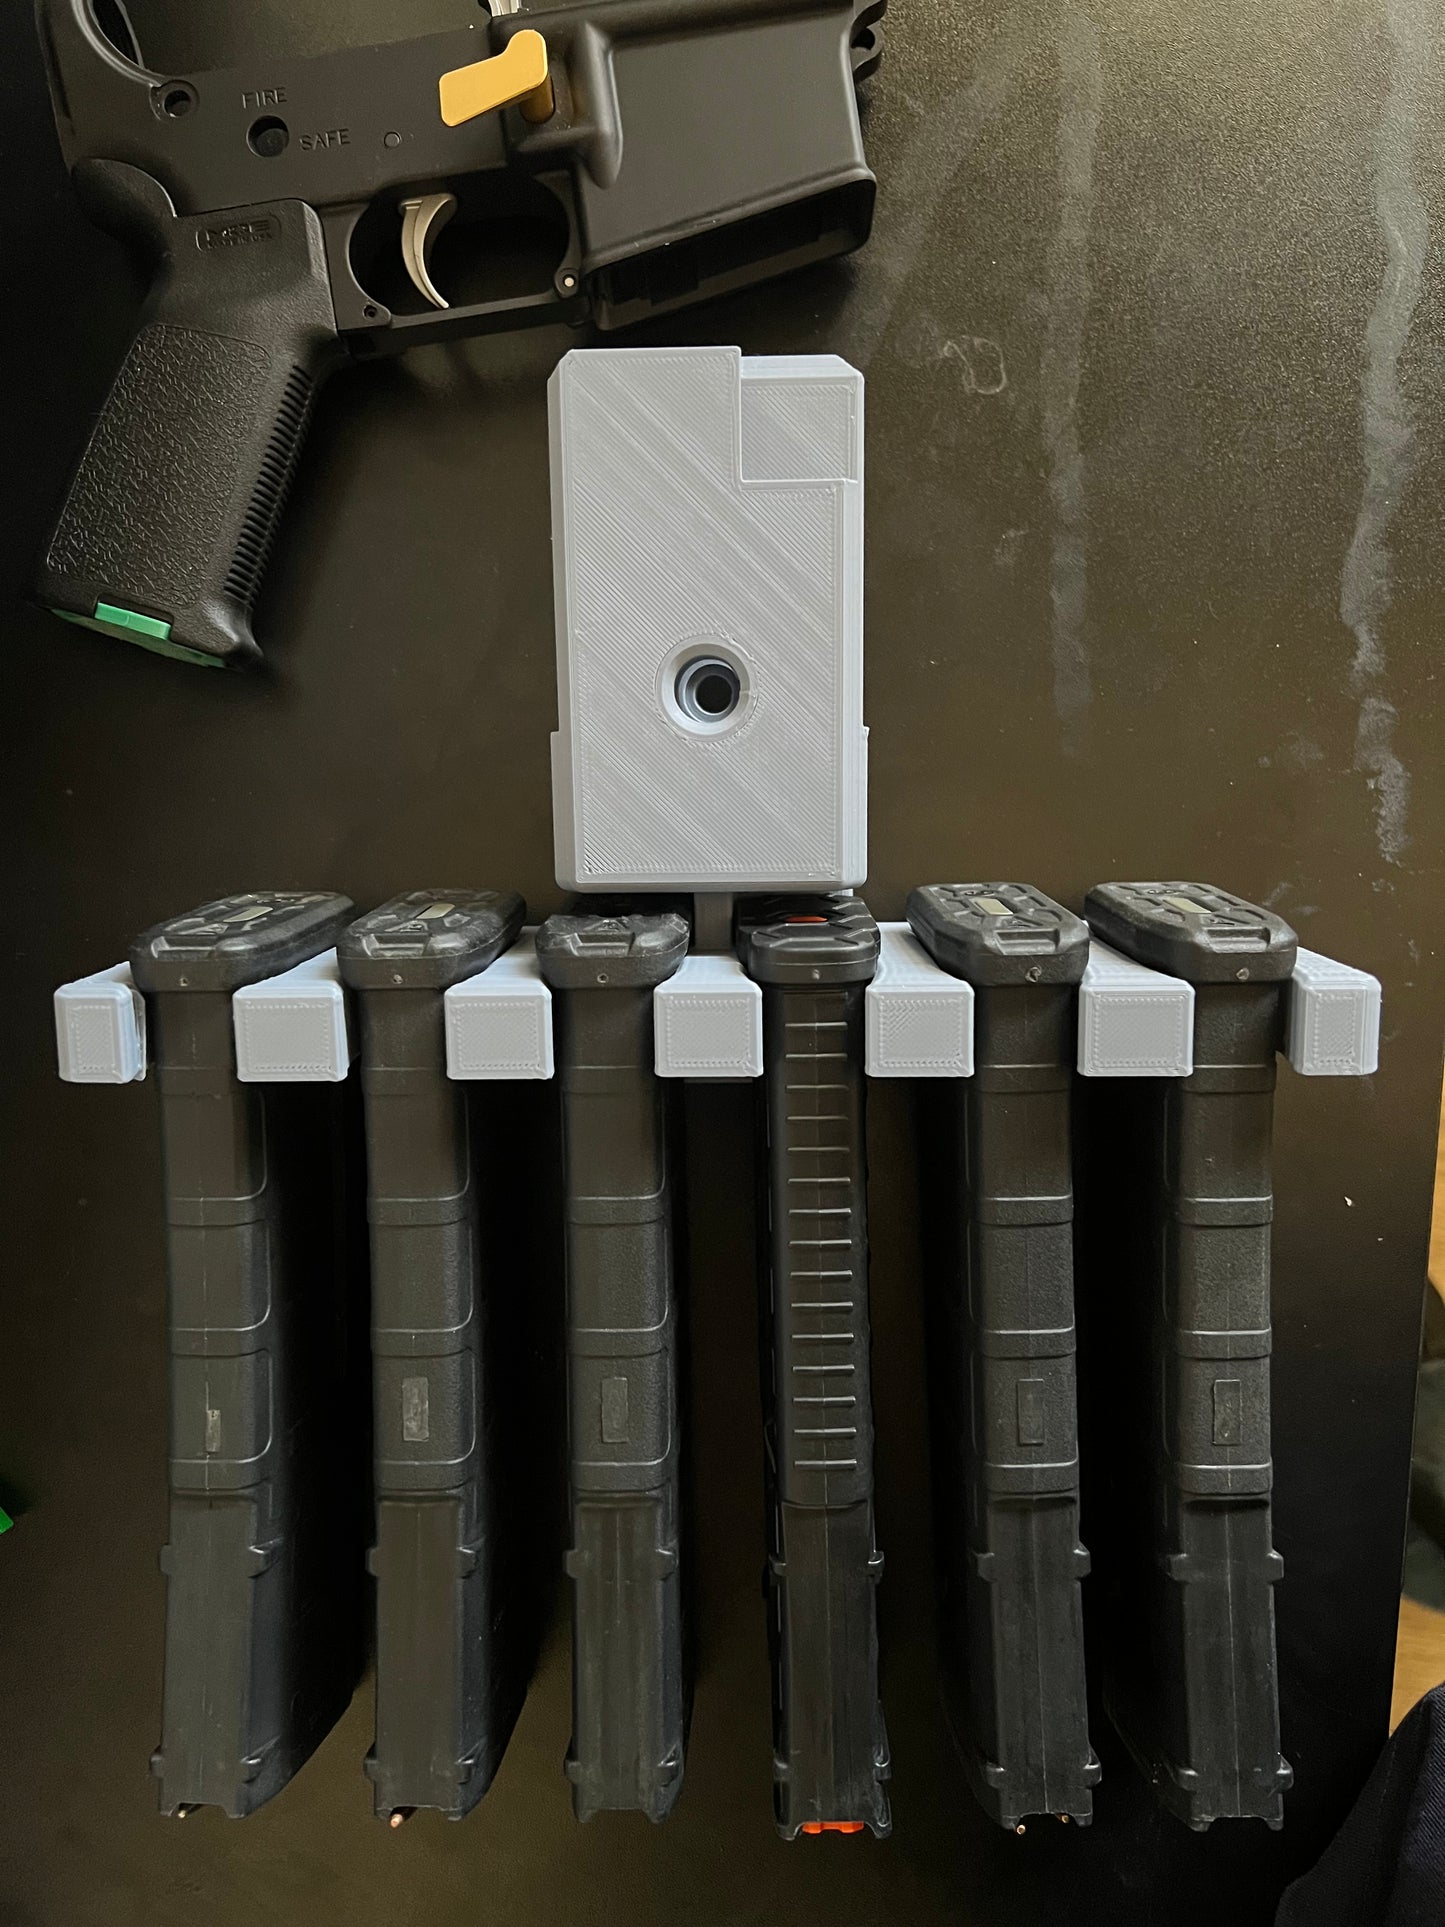 .1 - Introducing the Ultimate AR-15 Wall Mount with Integrated Magazine Holder!